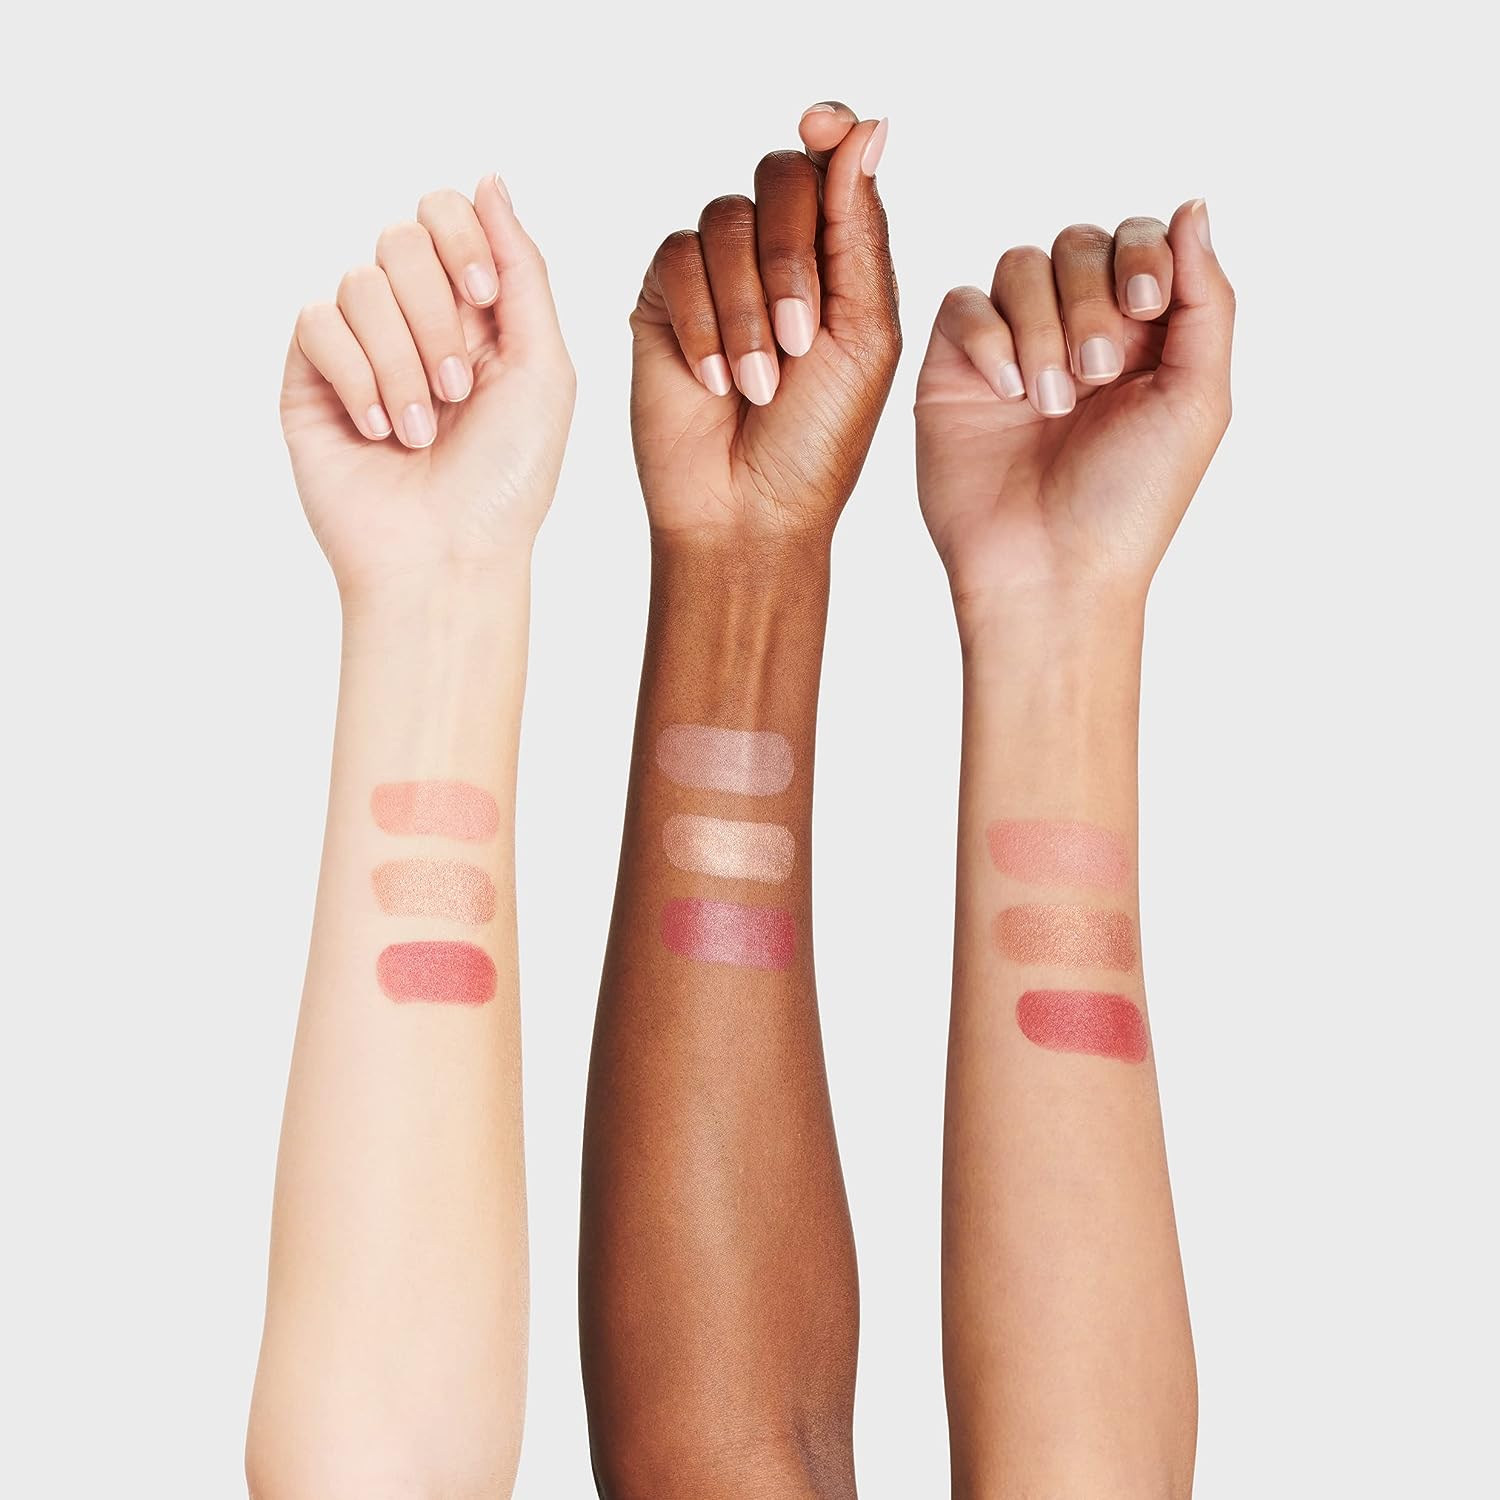 Colorescience Color Balm on various skin tones